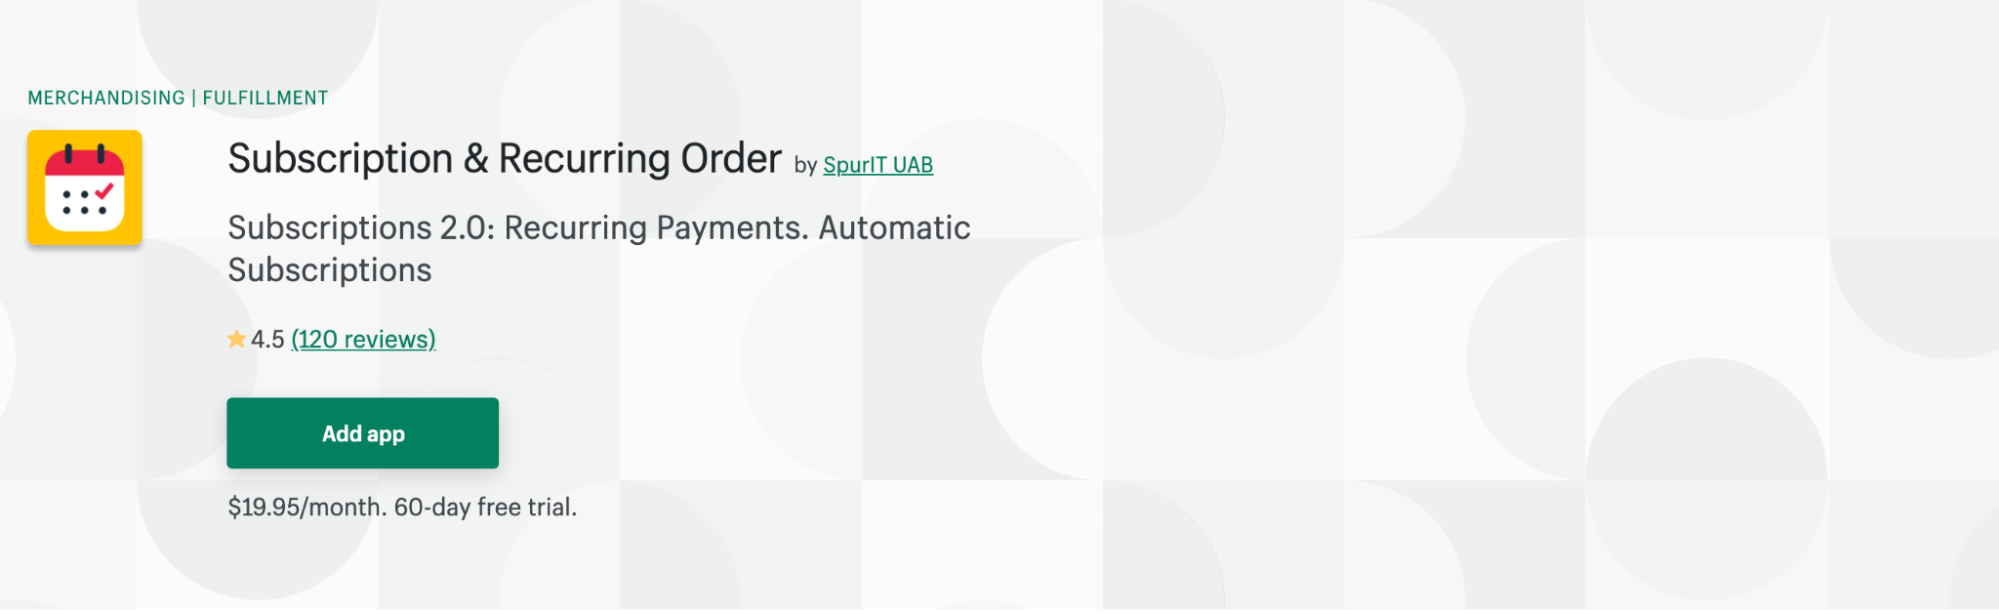 Subscription & Recurring Order by SpurIT UAB 